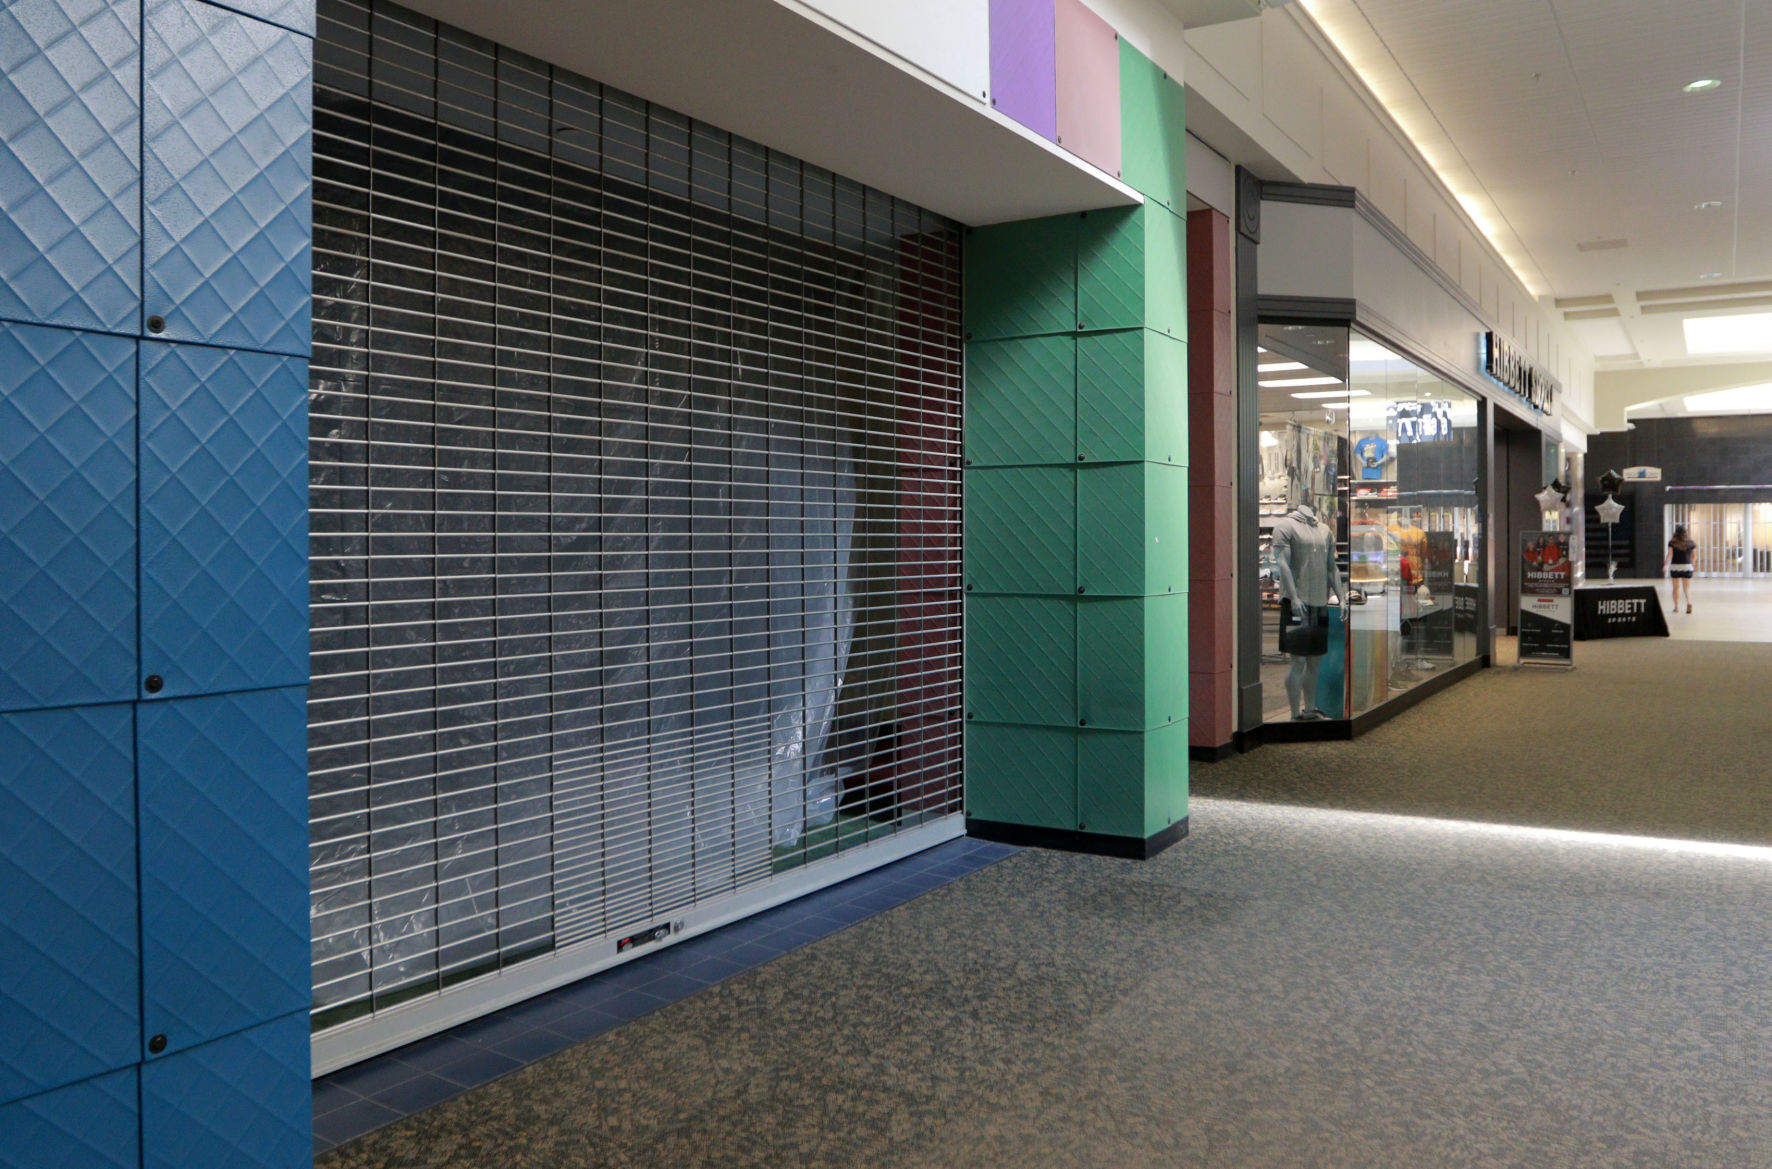 A storefront sits empty at Kennedy Mall in Dubuque. Shifting trends in retail have put a higher priority for brick-and-mortar locations to offer an in-person “experience” and to provide services that cannot be duplicated online. PHOTO CREDIT: Katie Goodale